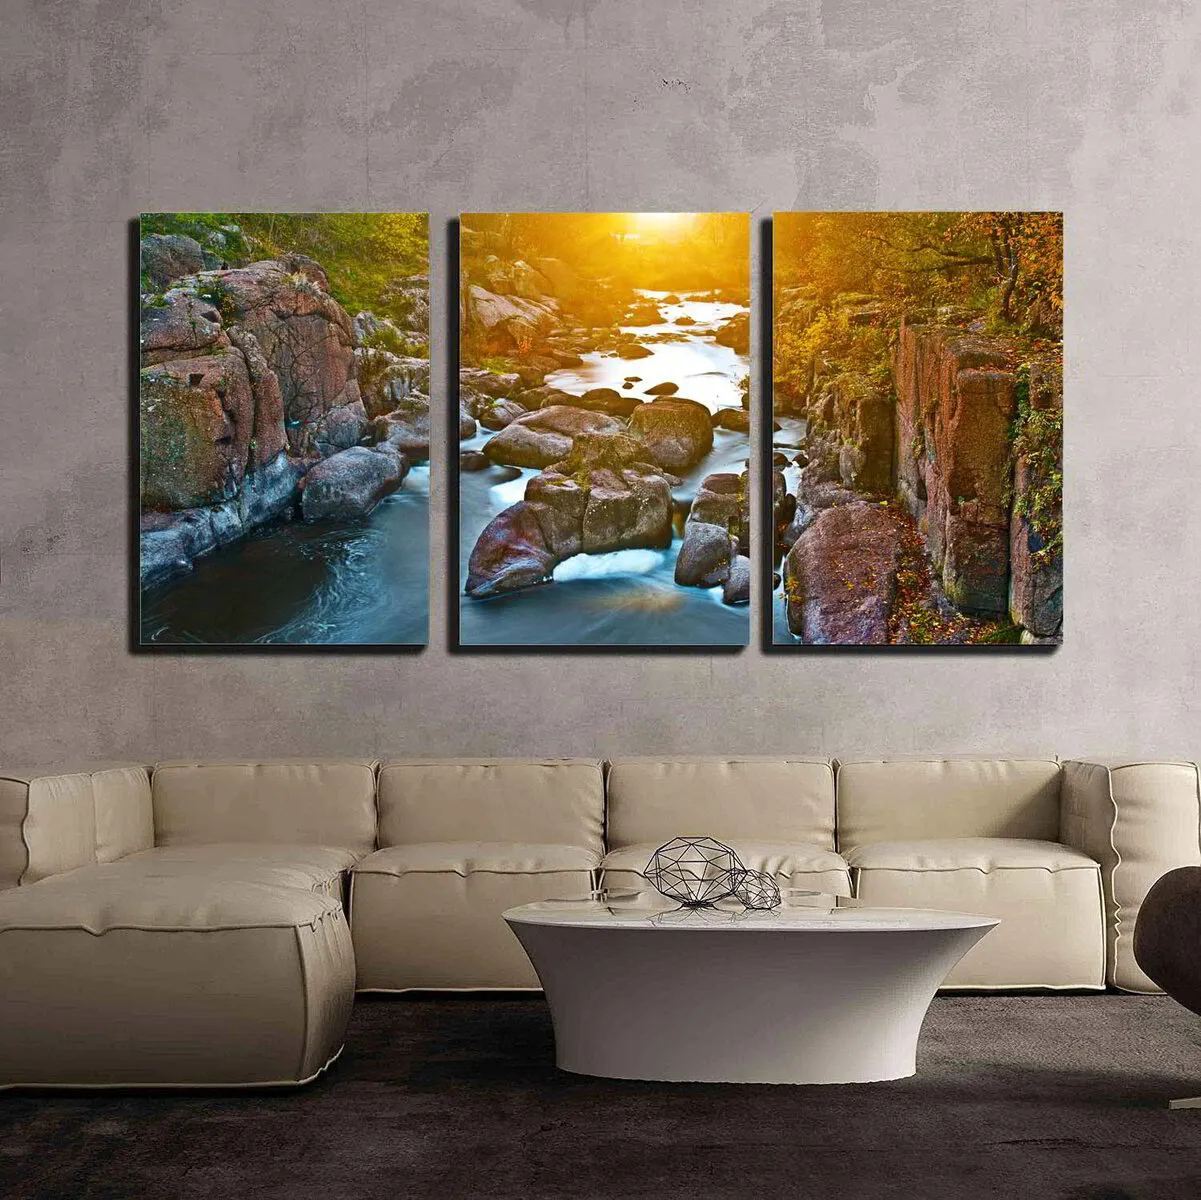 S3 Printed Acoustic Panels - Sunrise Over River - 3 Panels